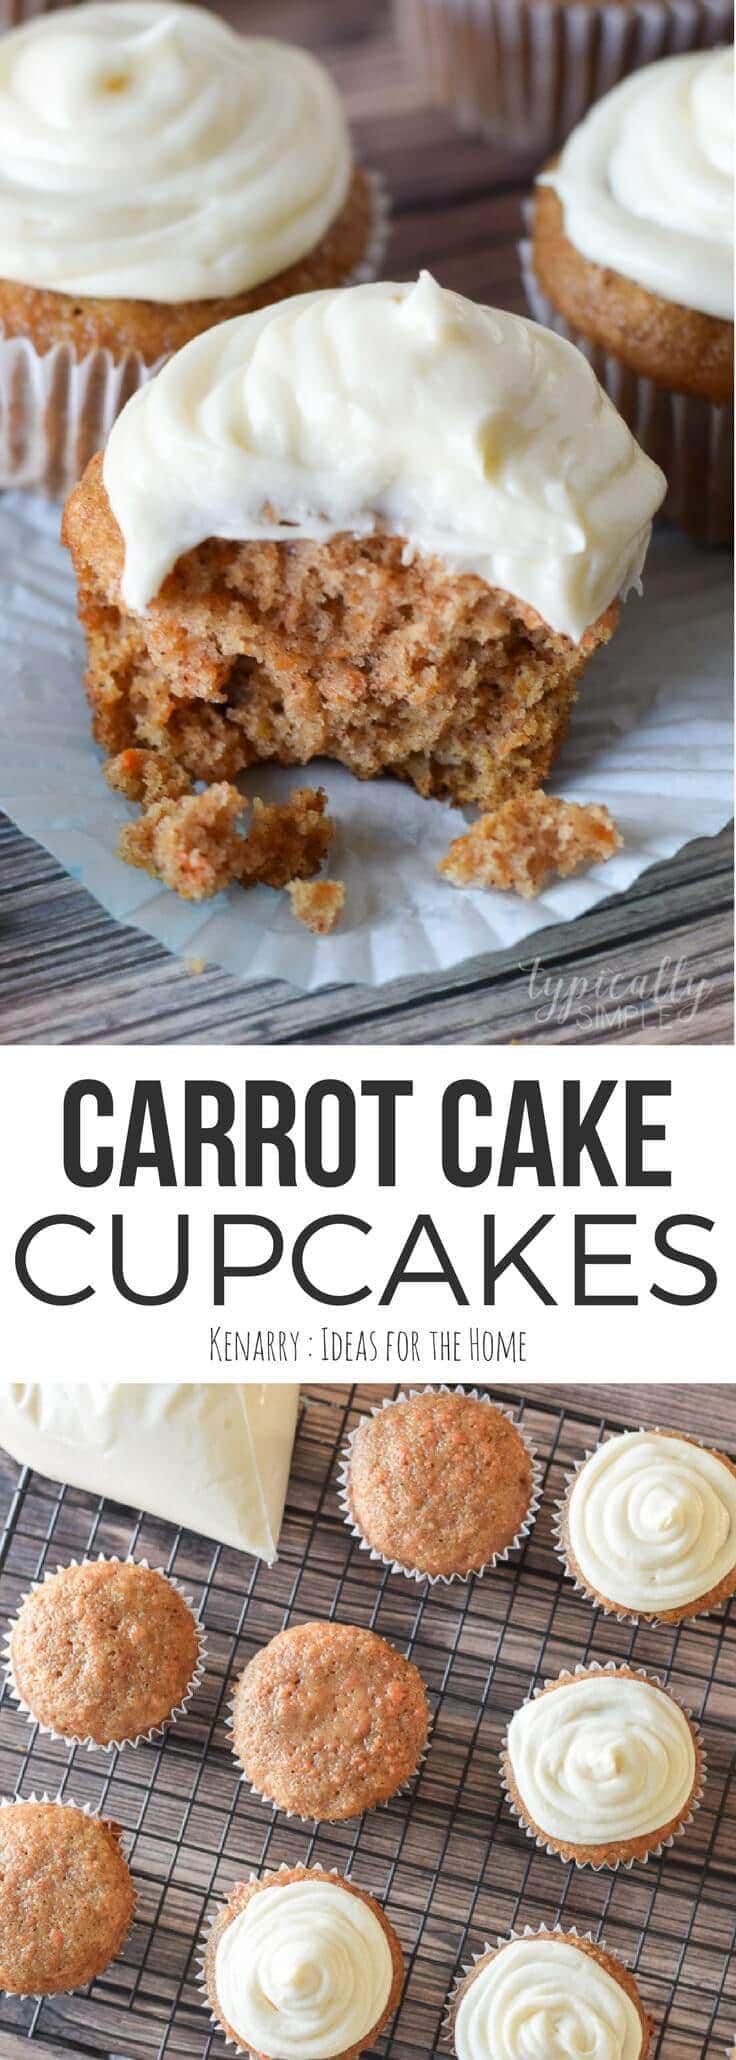 graphic for carrot cake cupcakes with cream cheese frosting